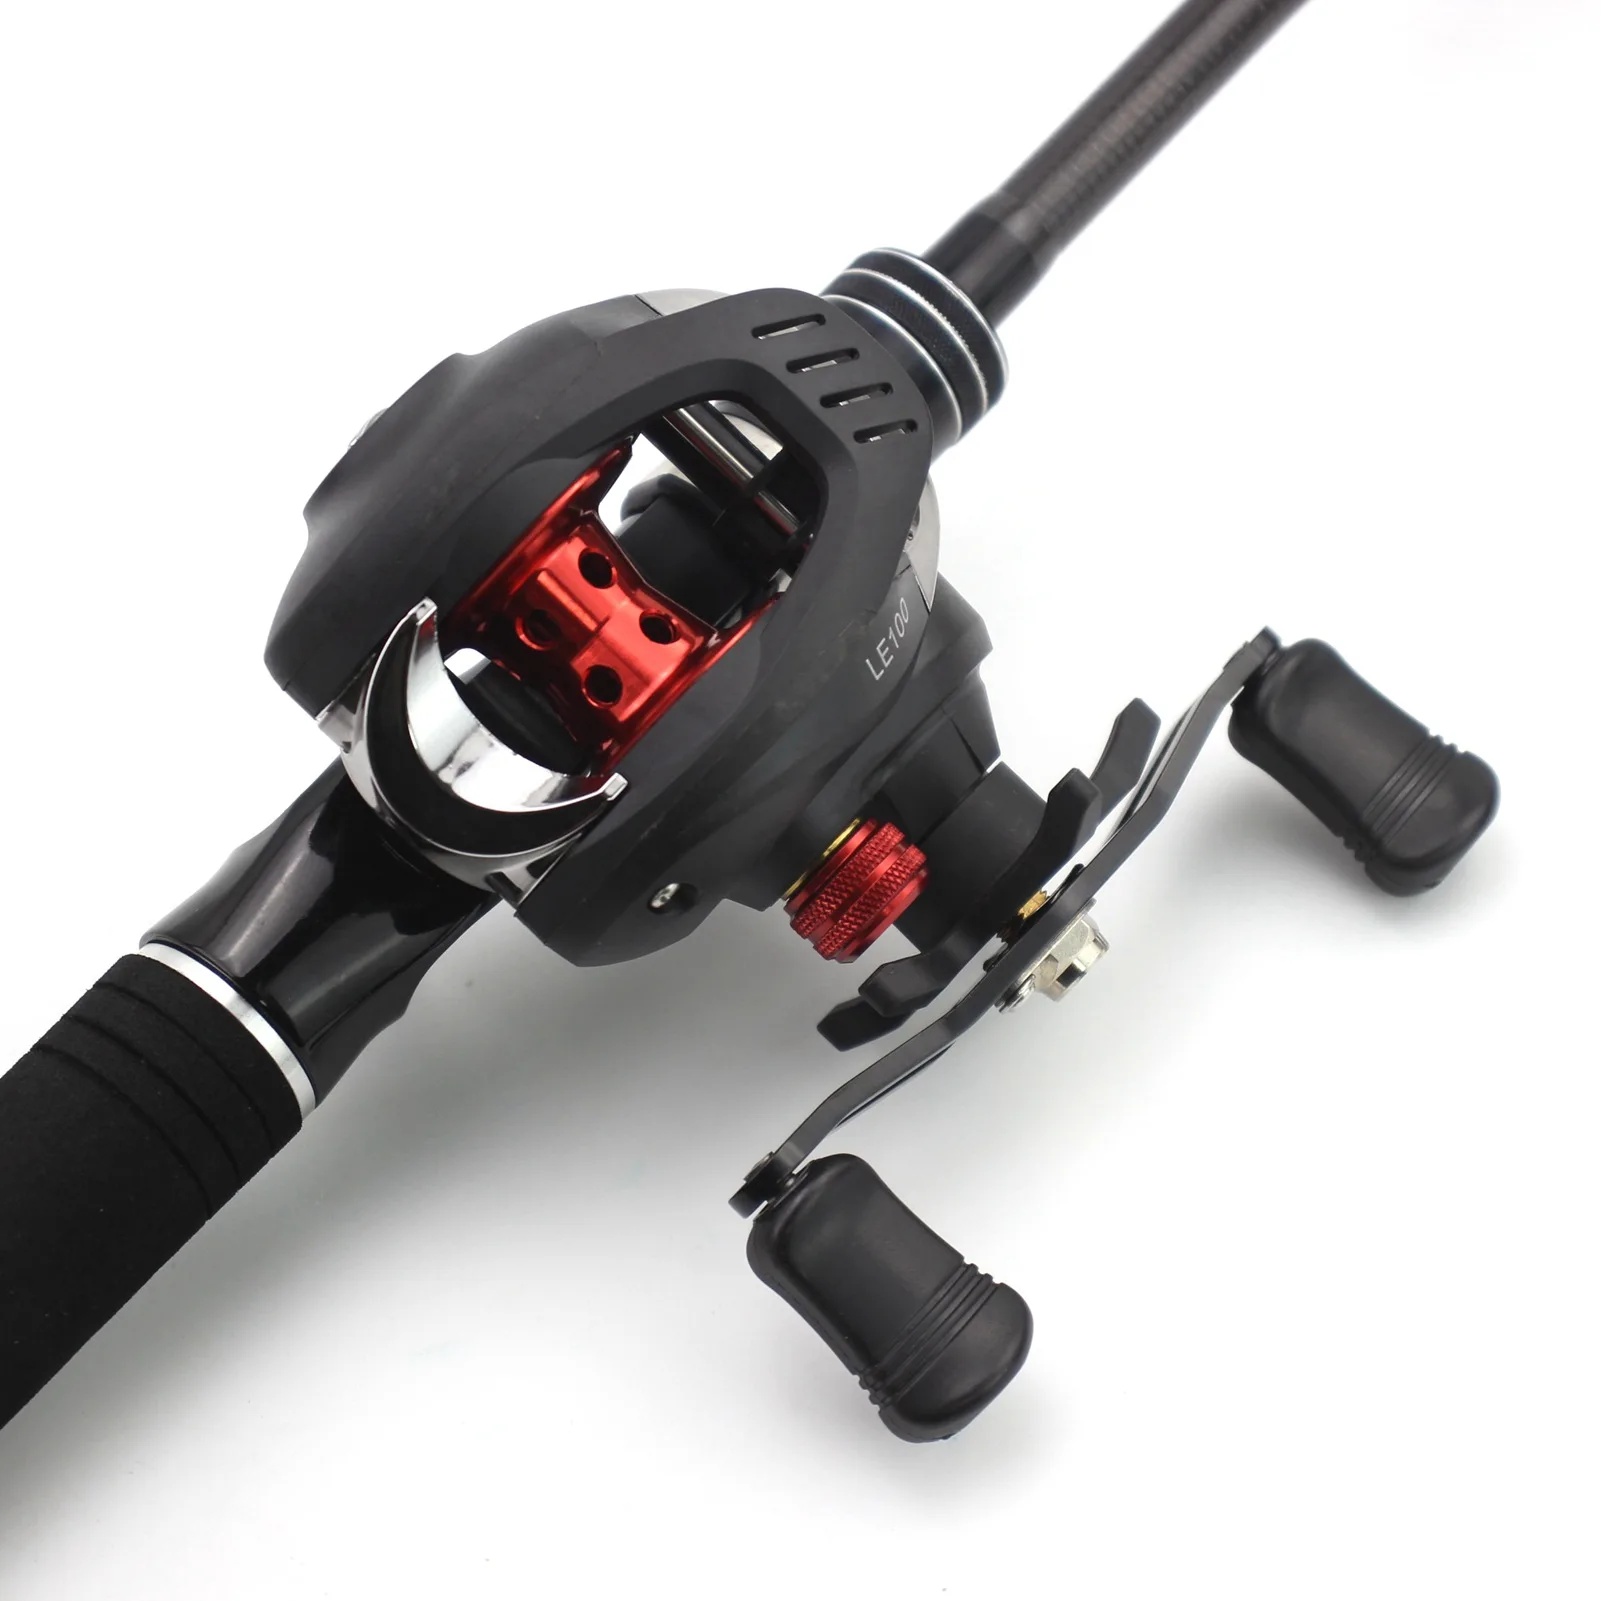 Super Soft Telescopic Fishing Rod and Reel Combo Ultralight Carbon Fiber Lure Weight 1-5g 1.5m 1.8m 1.92m Trout UL Casting Pole enlarge